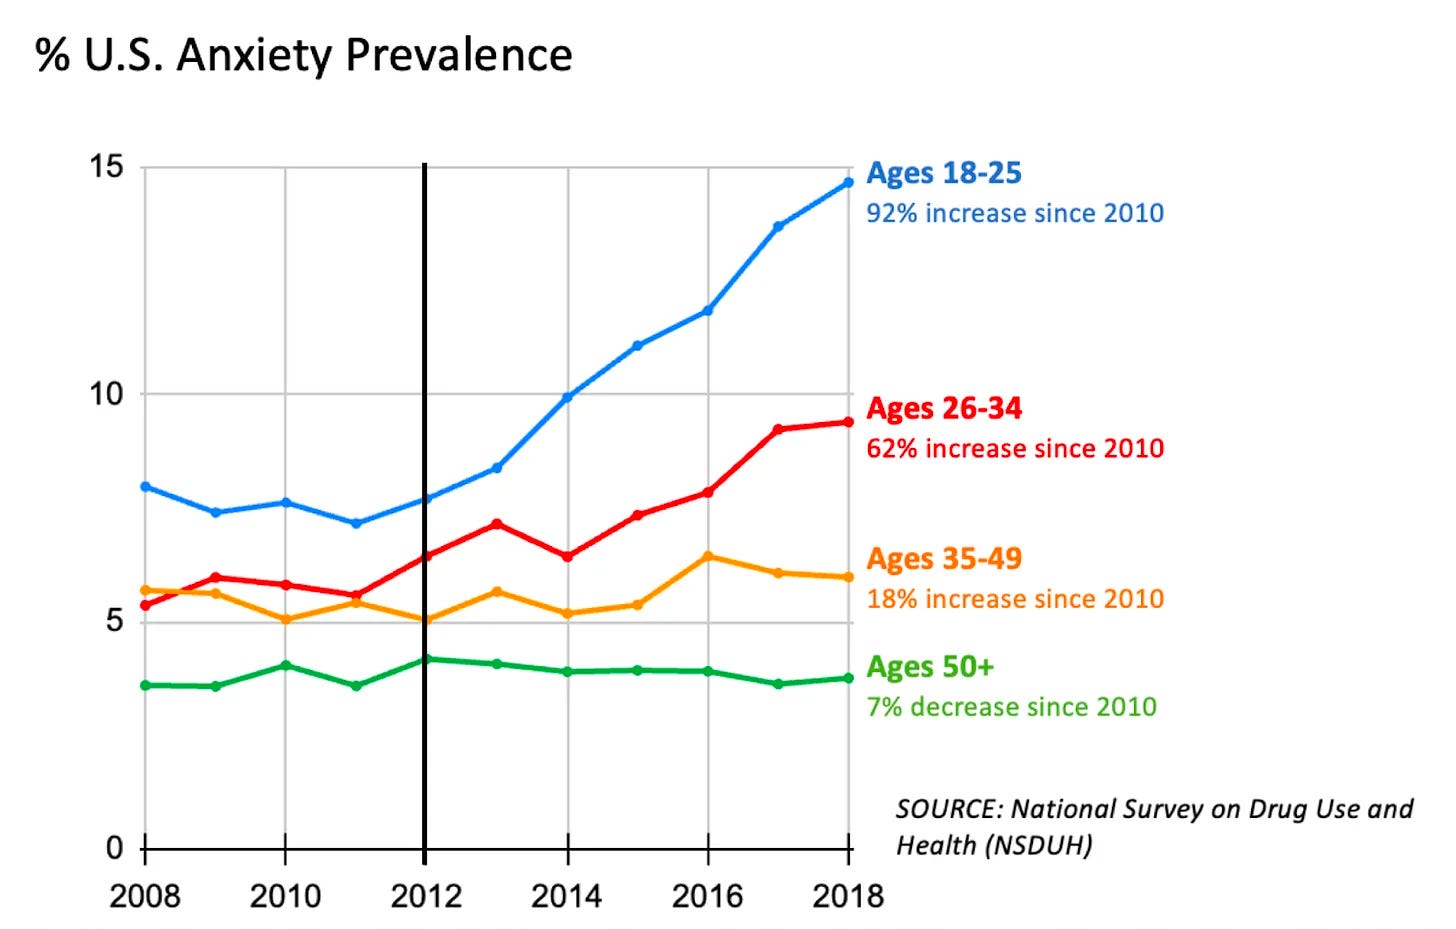 Percent US Anxiety Prevalence. National Survey on Drug Use and Health (NSDUH). Largest increases for 18-25 year olds.